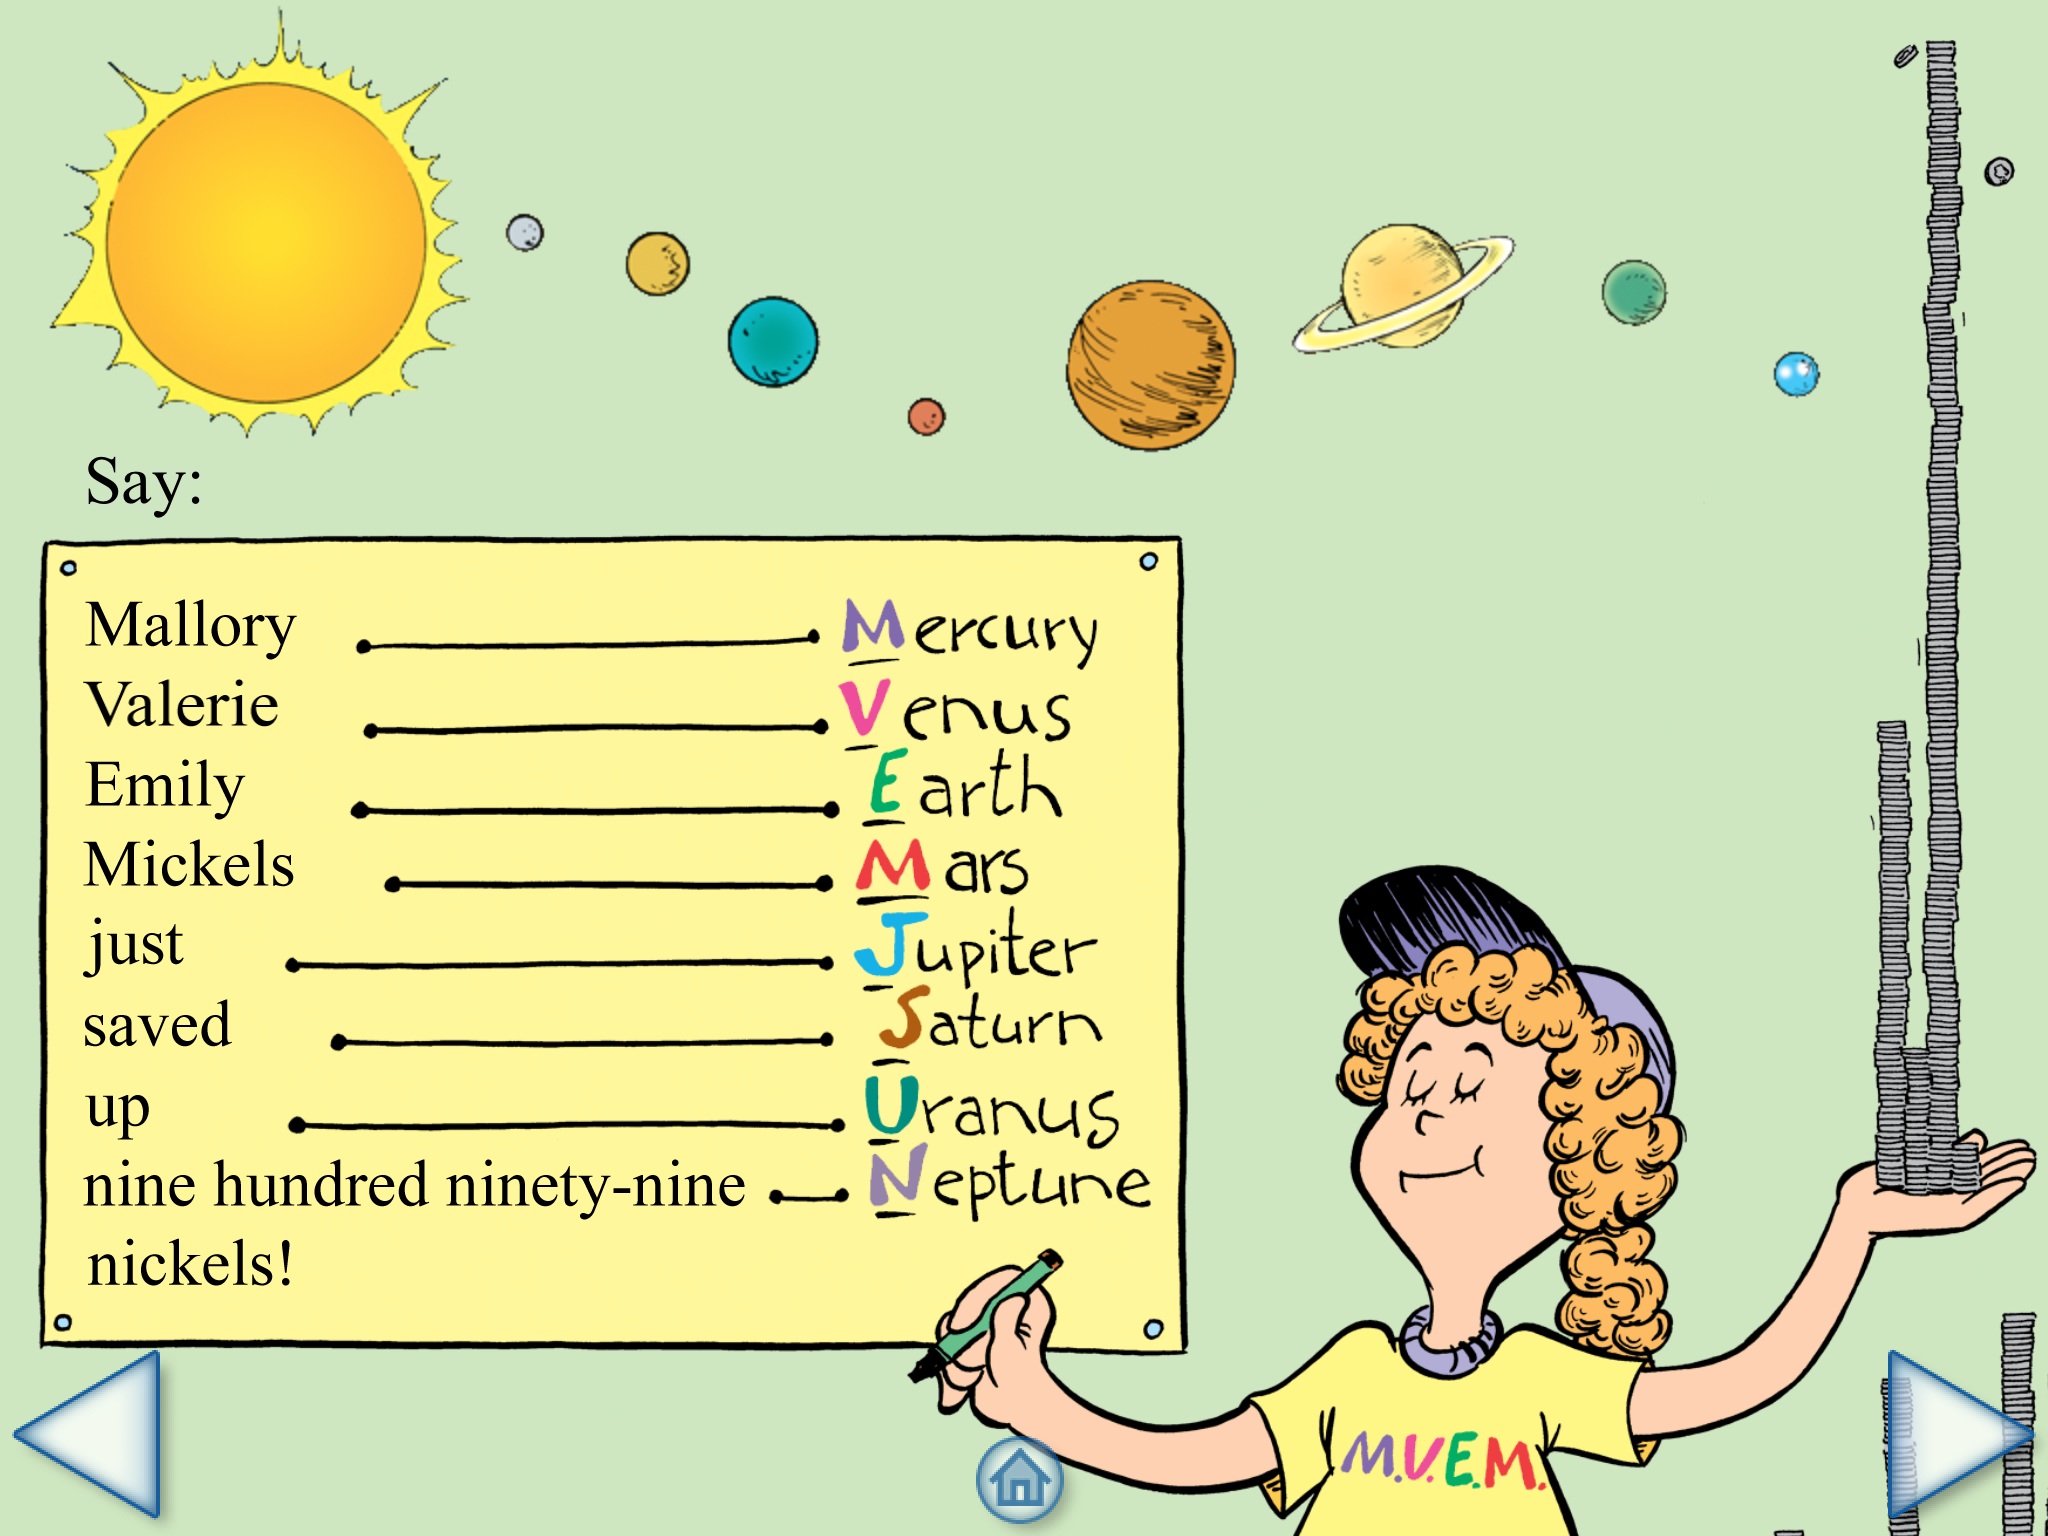 How can someone remember the order of the planets?